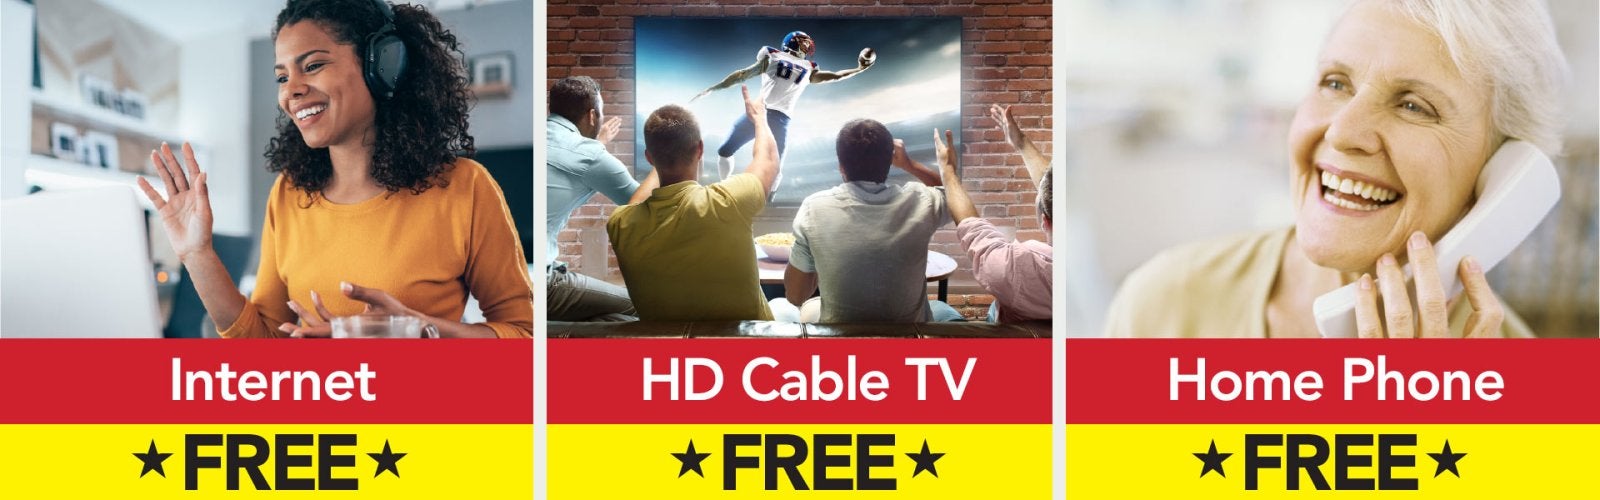 high-speed internet, cable tv, internet service, internet and cable tv package